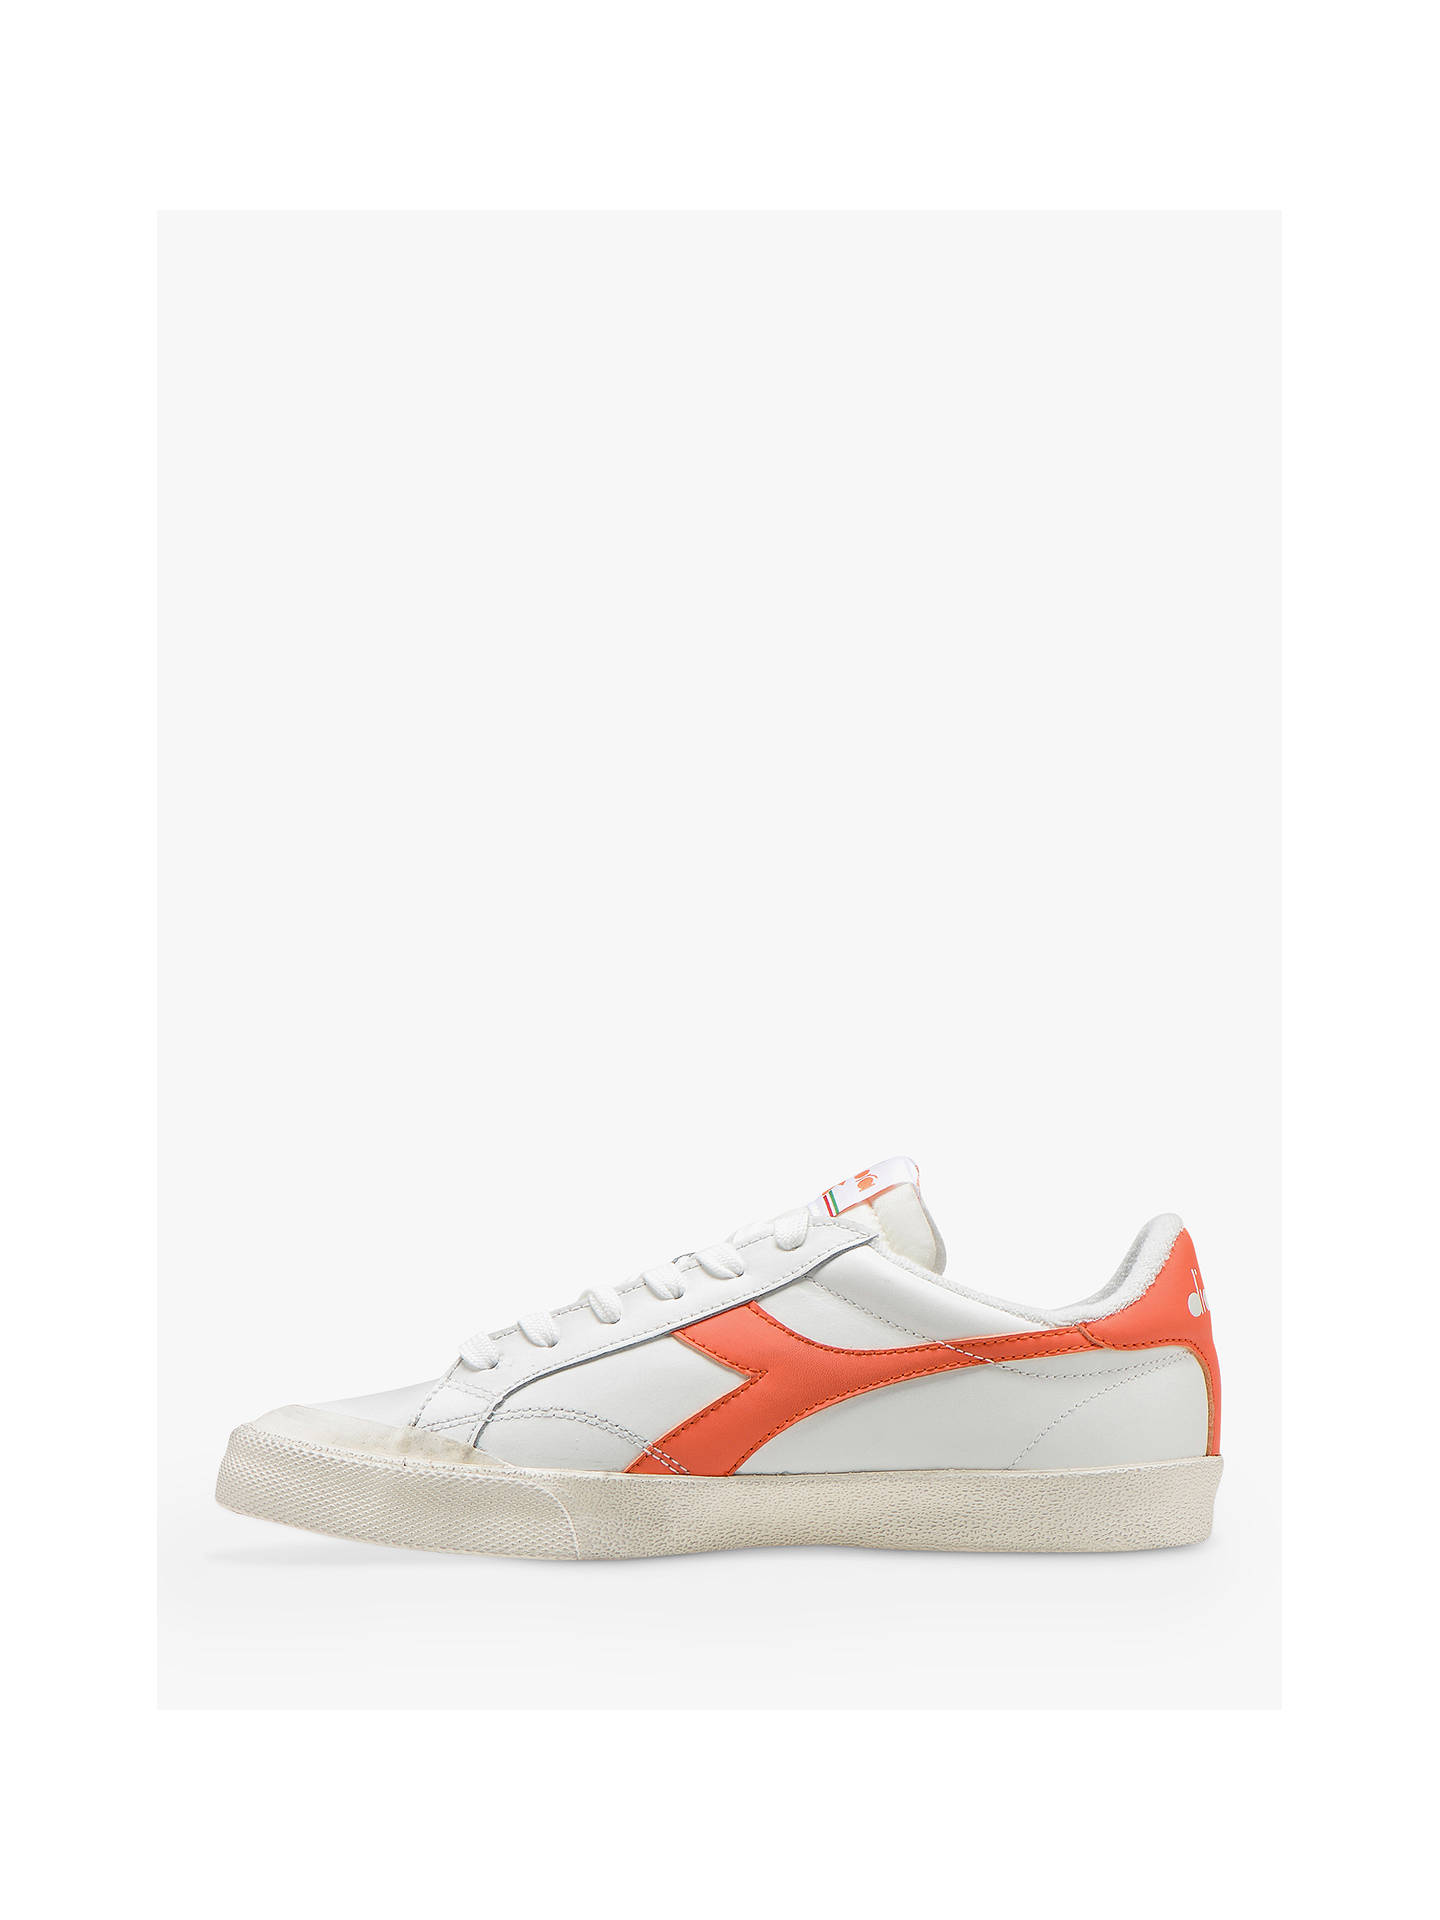 Diadora Melody Leather Dirty Trainers | White/Camelia at John Lewis ...